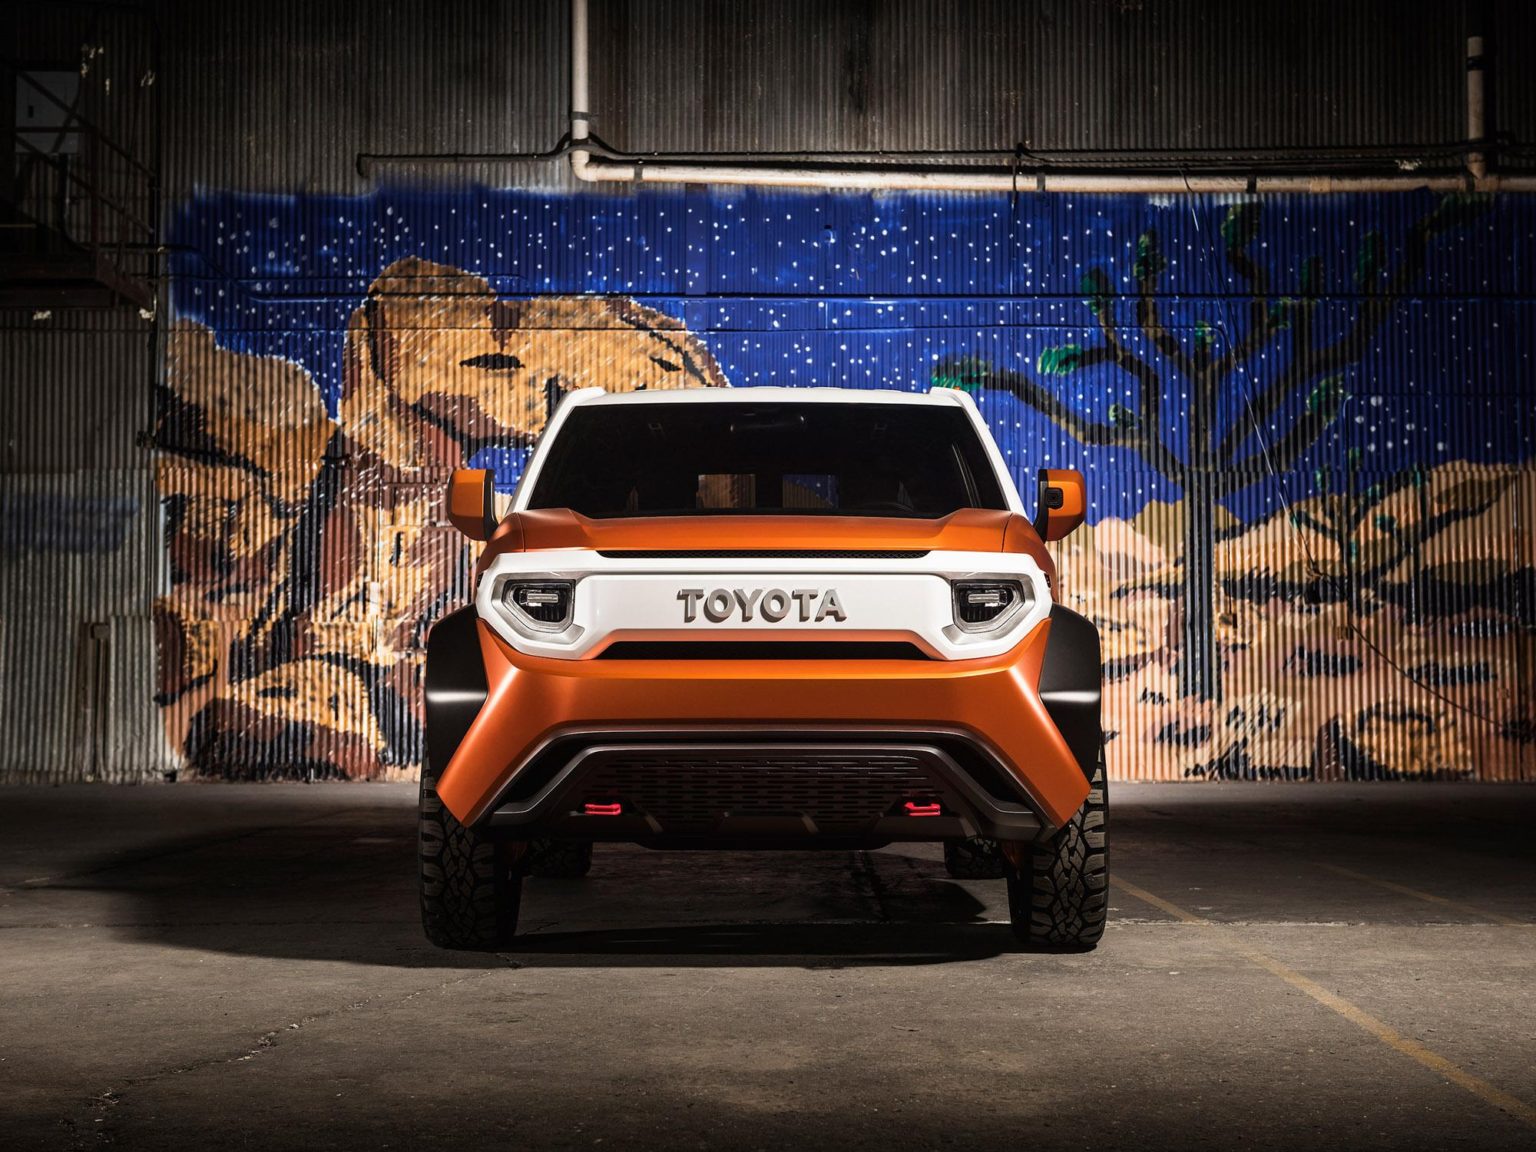 Is a production version of the Toyota FT-4X Concept on the horizon?